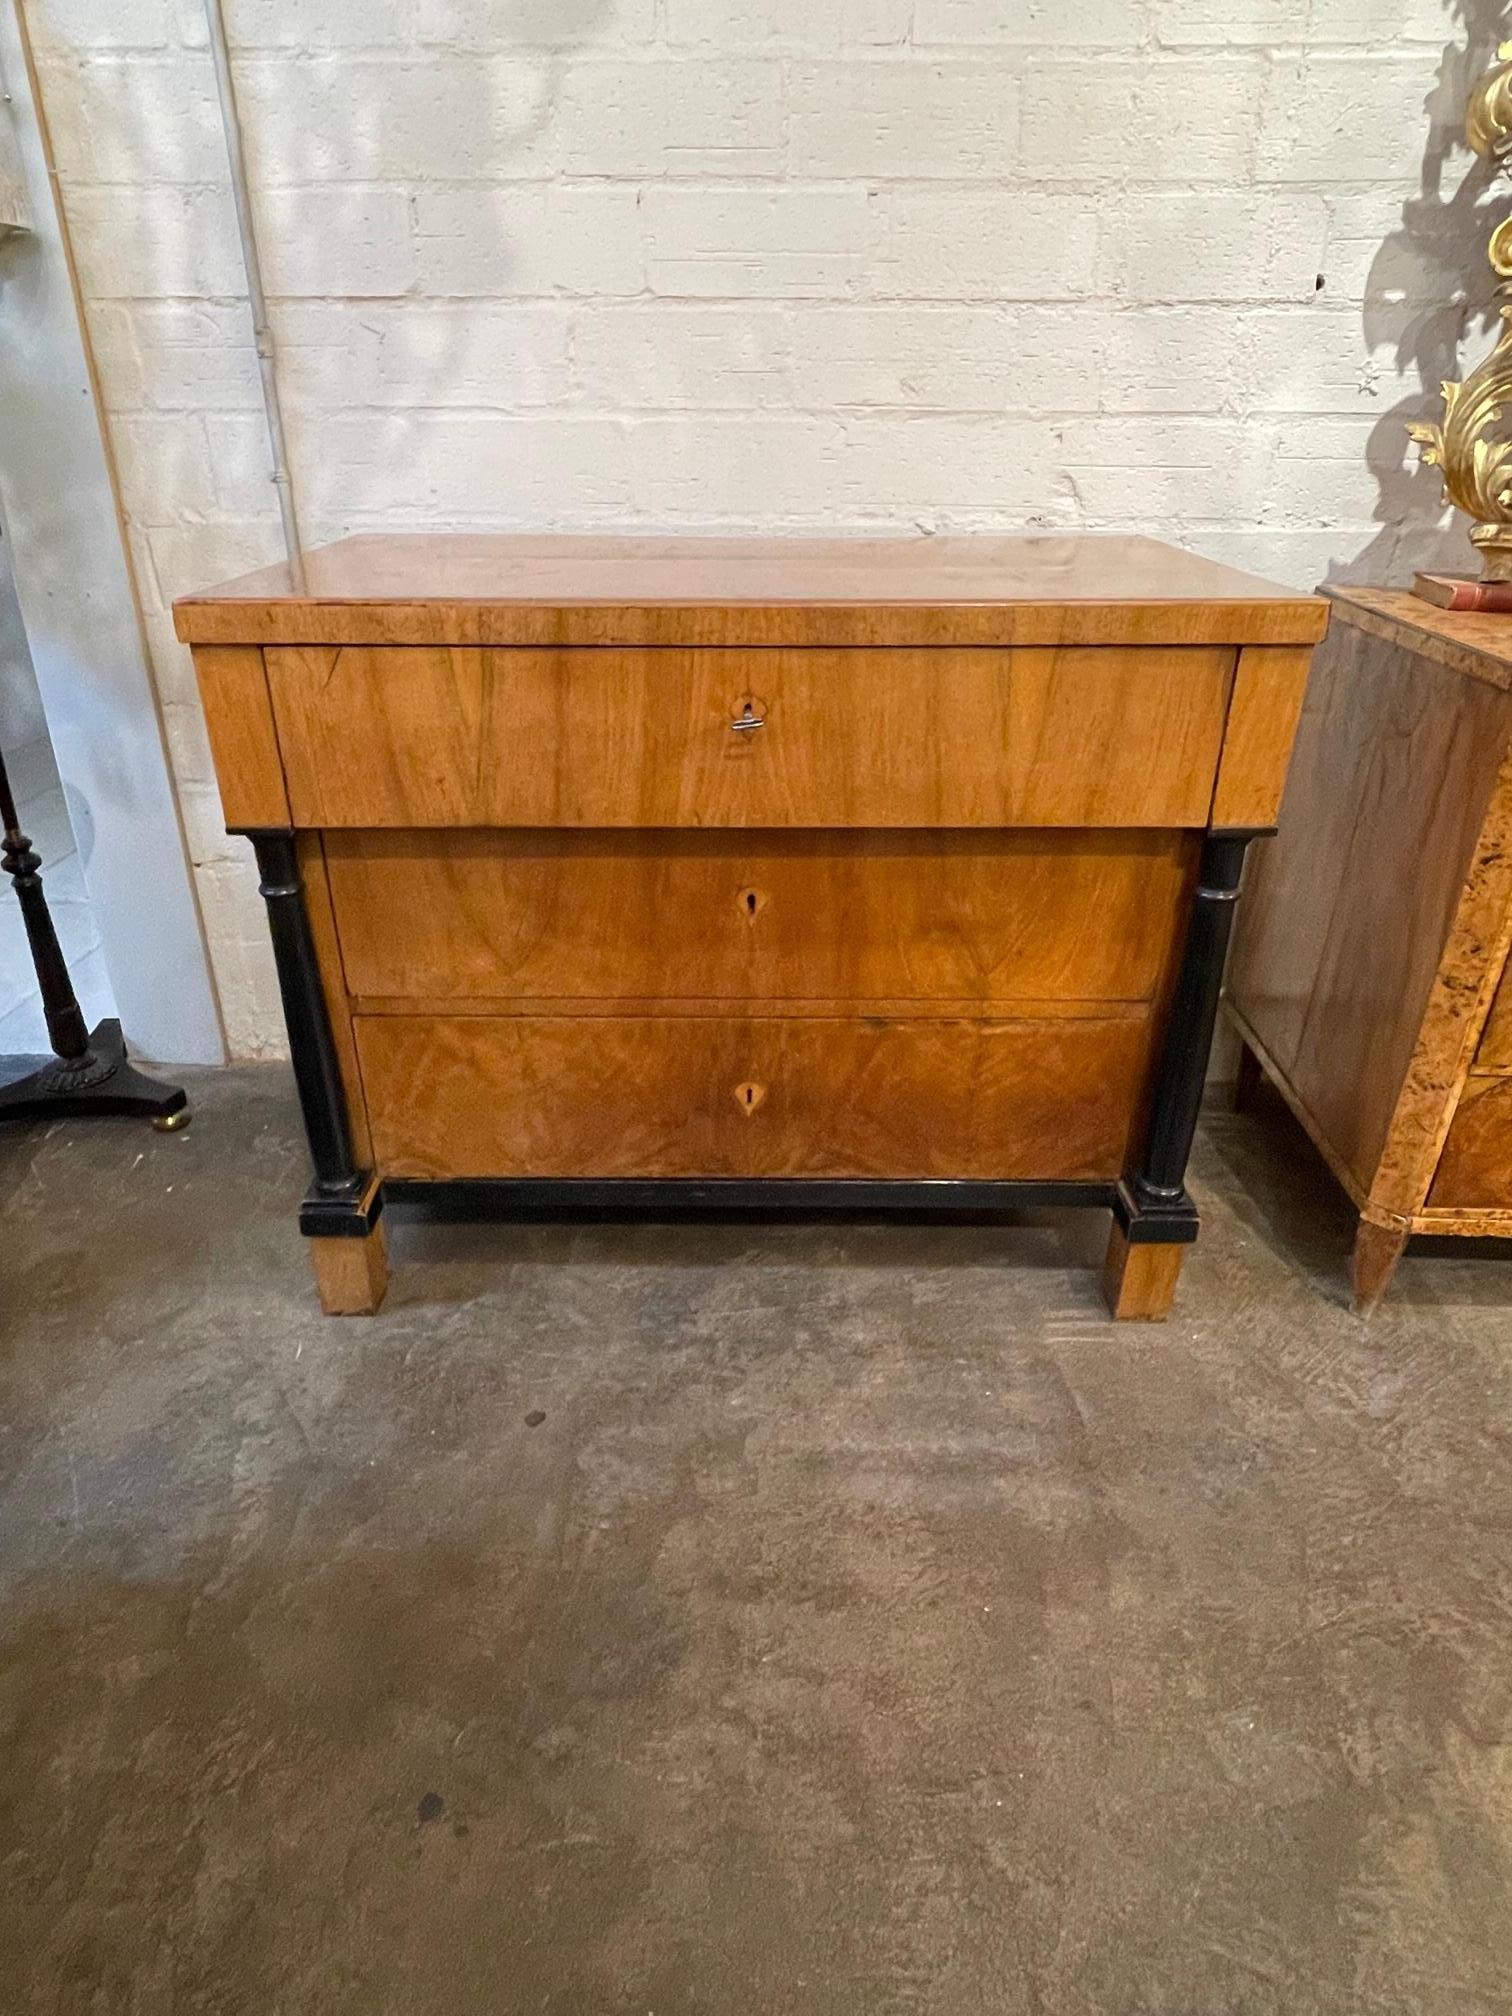 Very fine flame mahogany Biedermeier commode with ebonized details. The piece opens up to reveal drawers for storage. And the finish on this piece is exceptional. Stunning!!